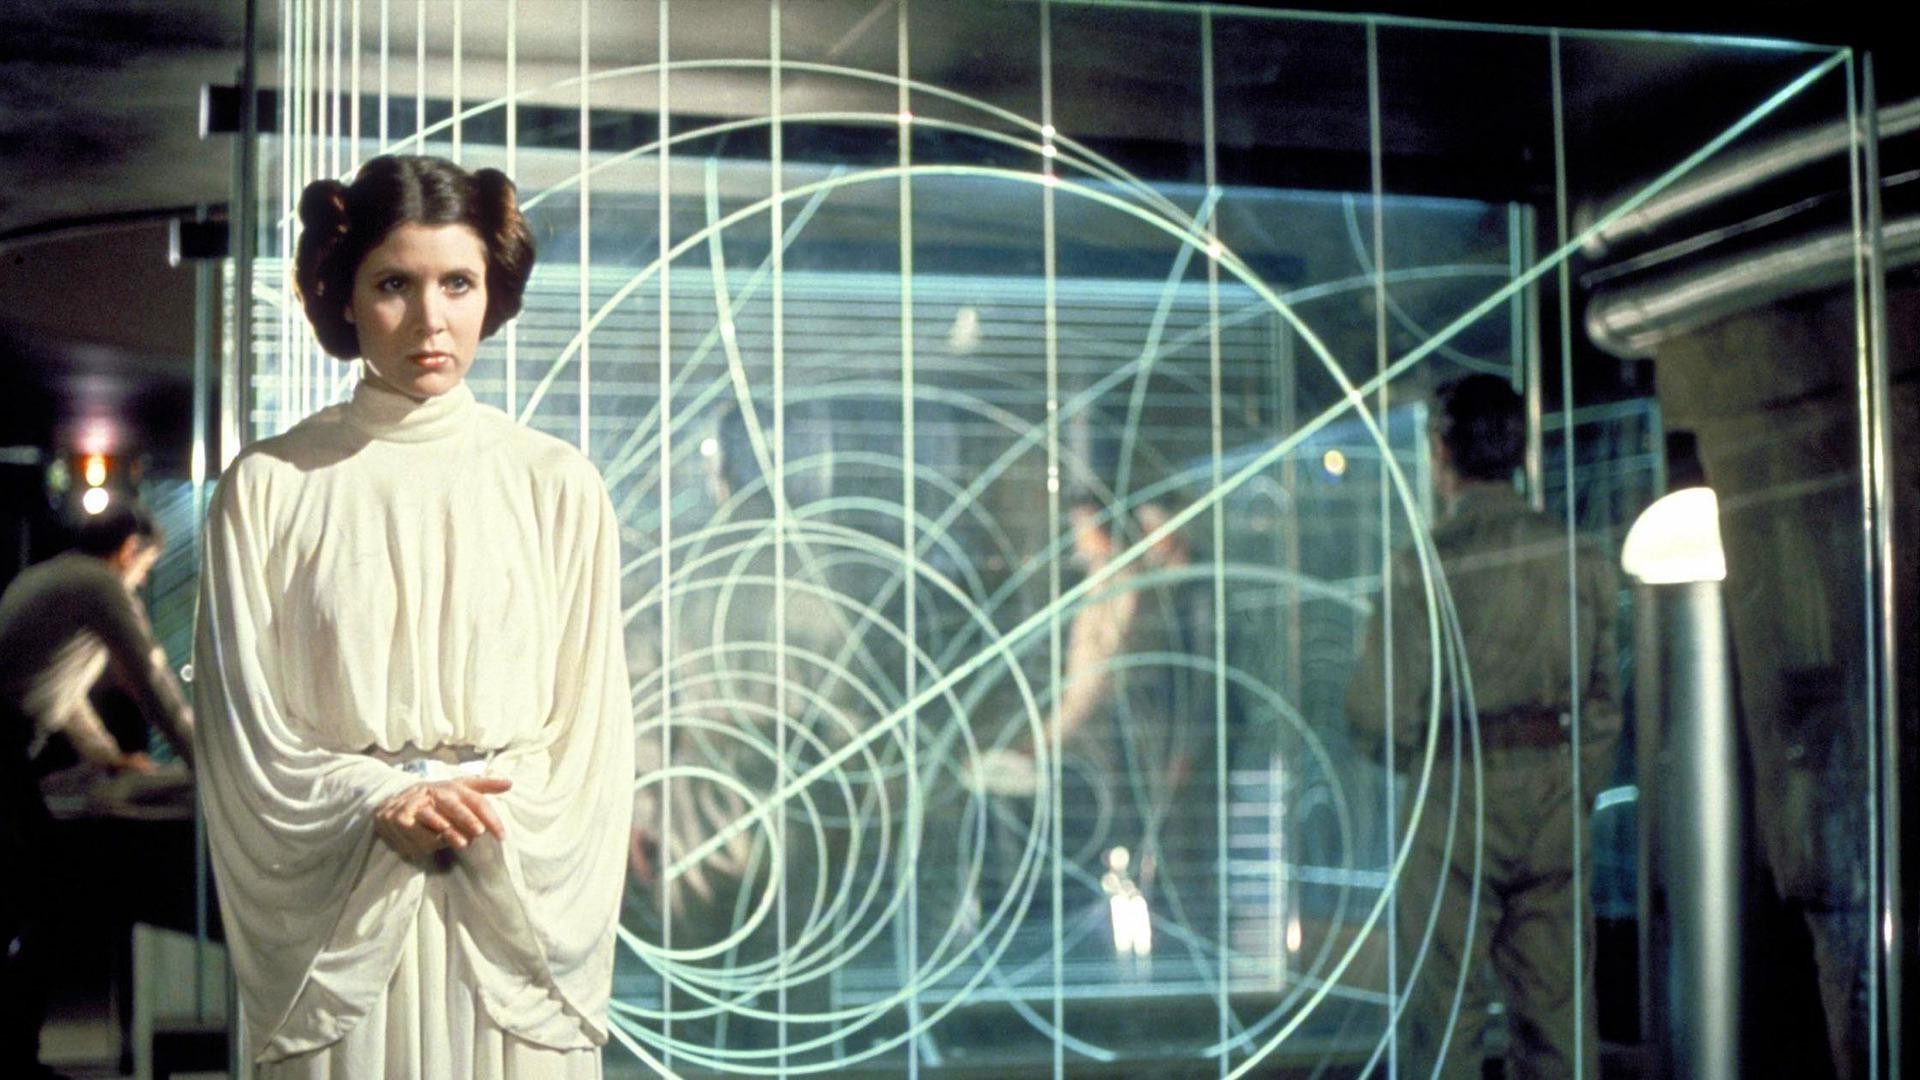 1920x1080 Movies Star Wars Leia Organa Carrie Fisher Wallpaper And Background Jpg 344 Kb 1920x1080